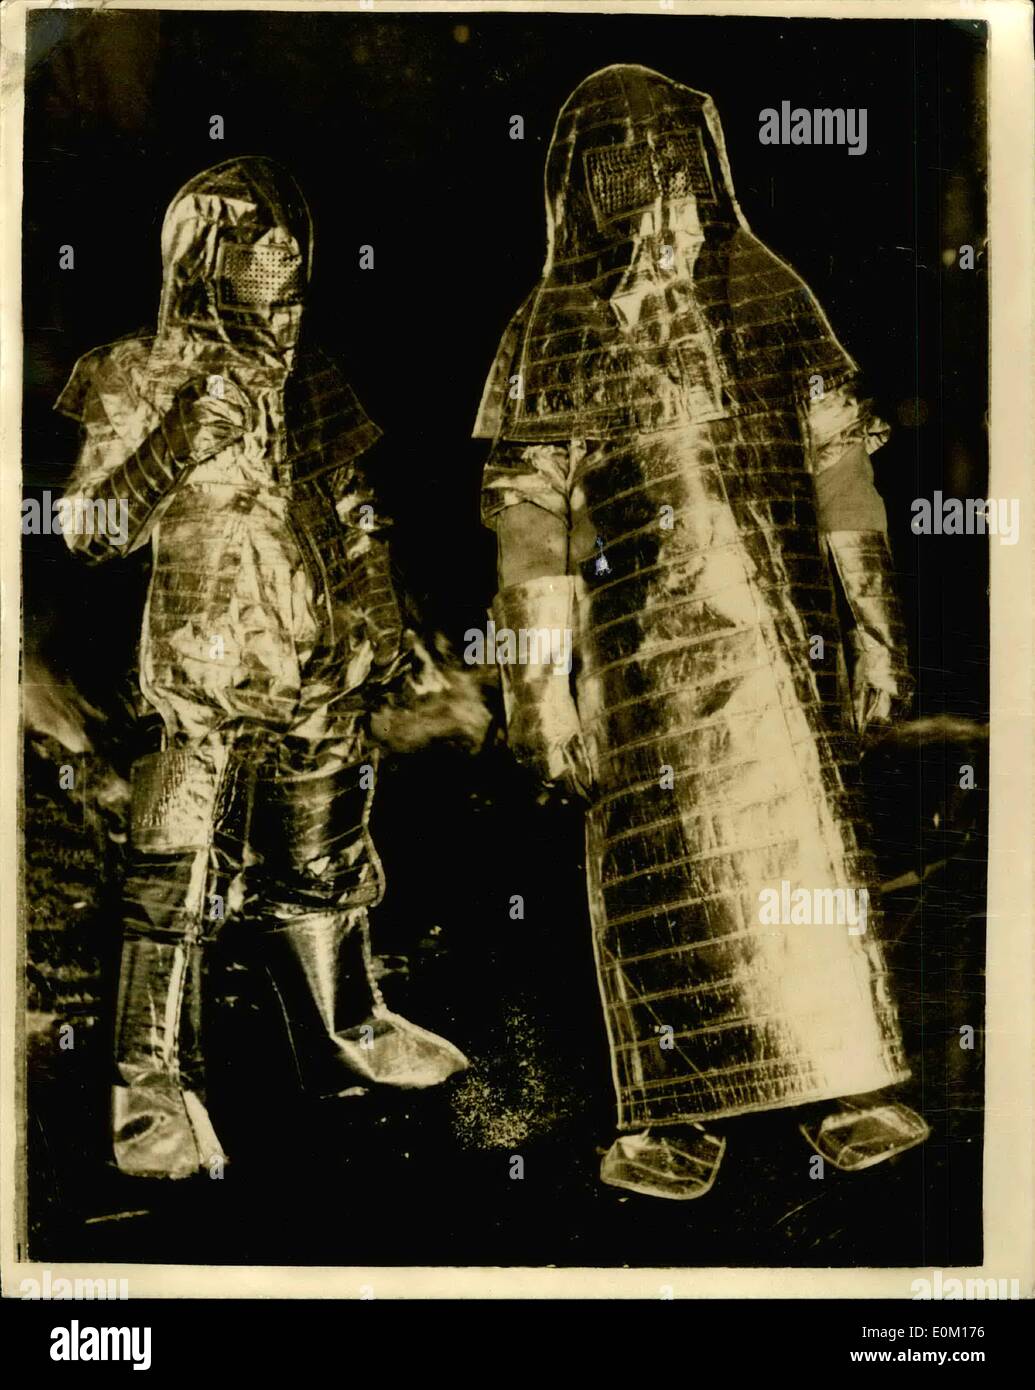 Jan. 09, 1953 - 9-1-53 They look like men from Mars. Suits of aluminum foil for fire protection. Looking rather like men from another world are these firemen in Munich Germany as they try out suits made of an aluminum foil which gives complete protection in fires of a great heat. If successful, the suits are expected to be issued for all fire fighting in Munich. The material from which the suits are made is as thin as cigarette papers. Stock Photo